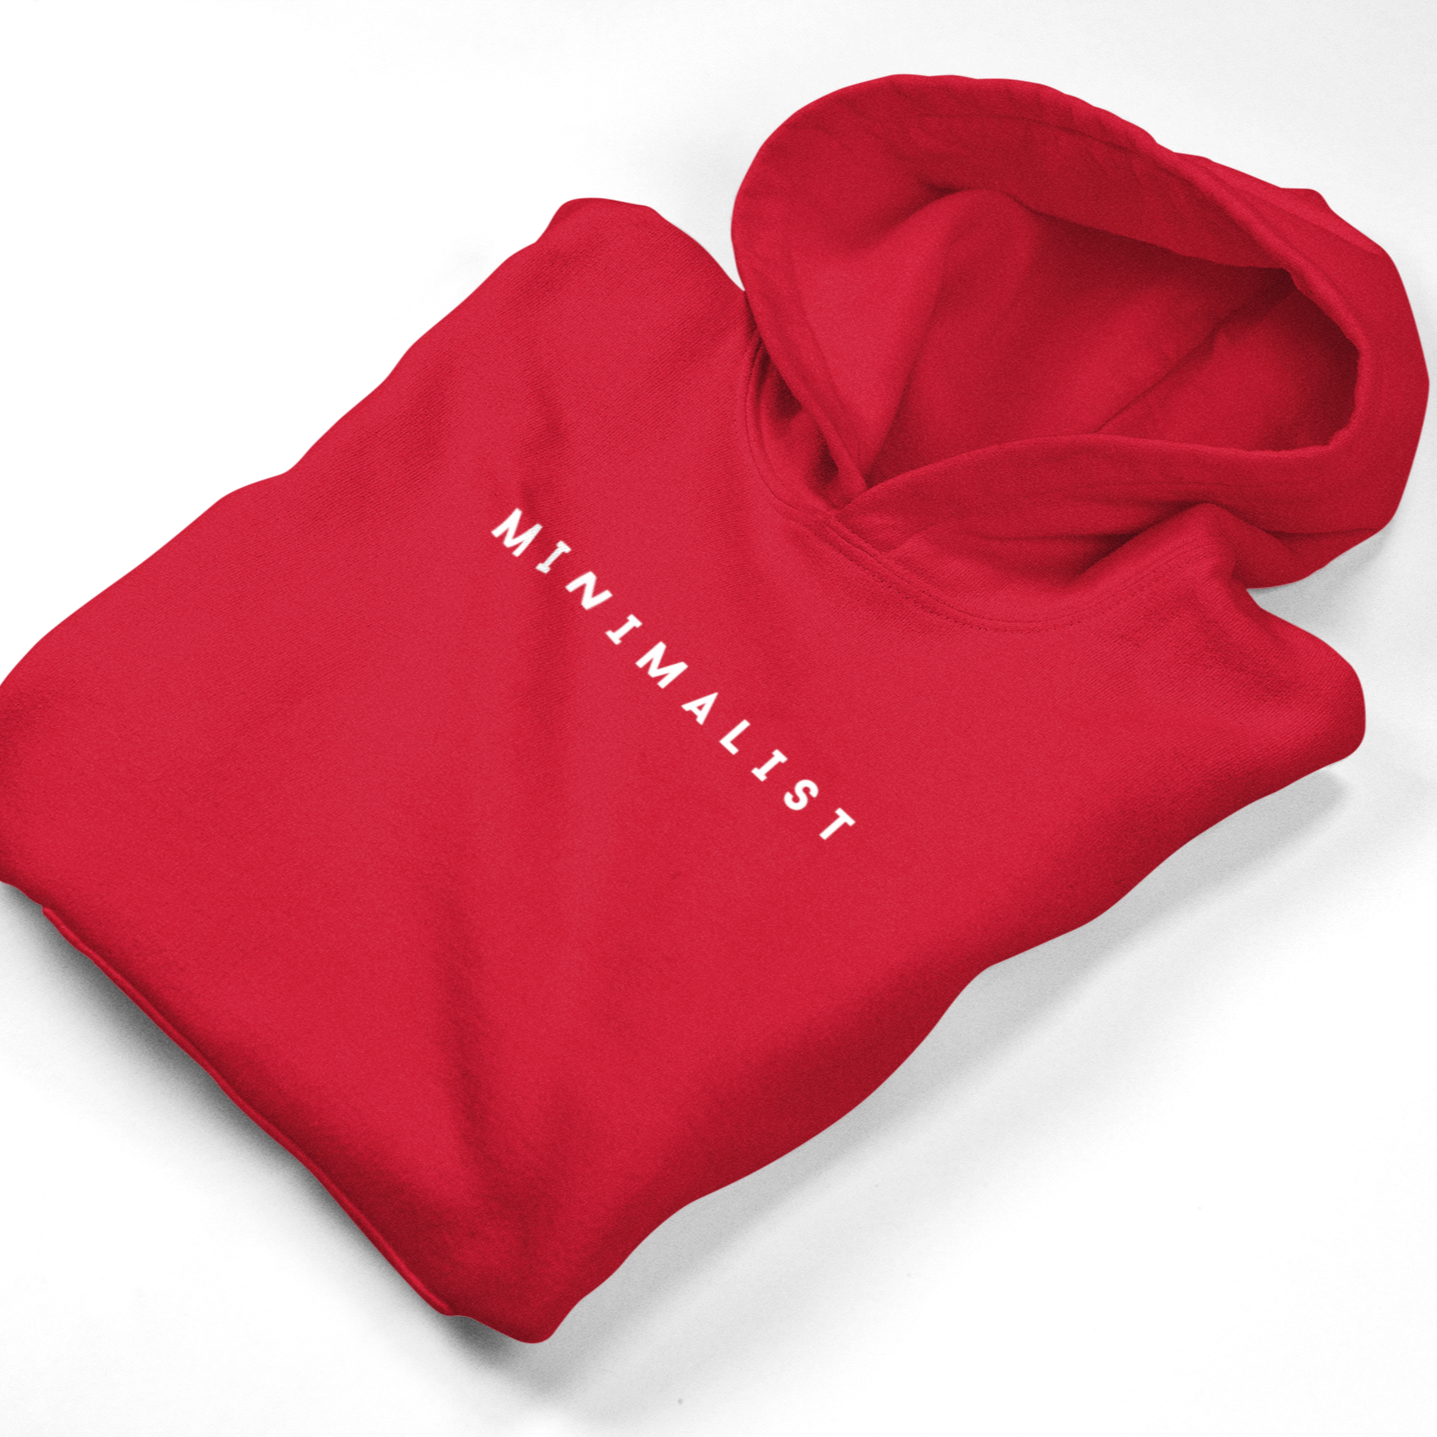 Simplicity meets style: Our Minimalist Men's Hoodie